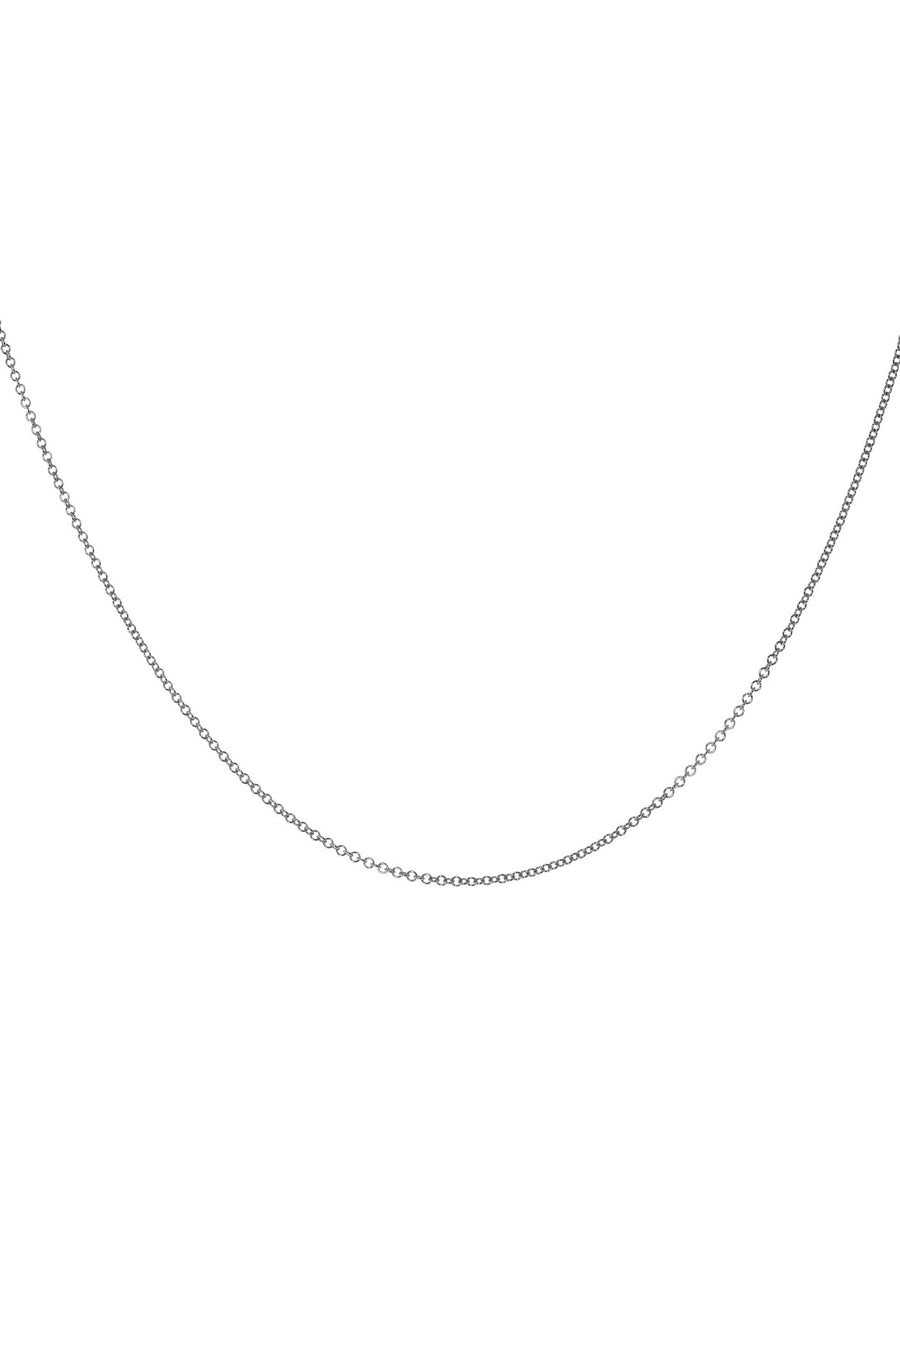 1.3mm Cable Chain Necklace in 14k Gold  | 18"